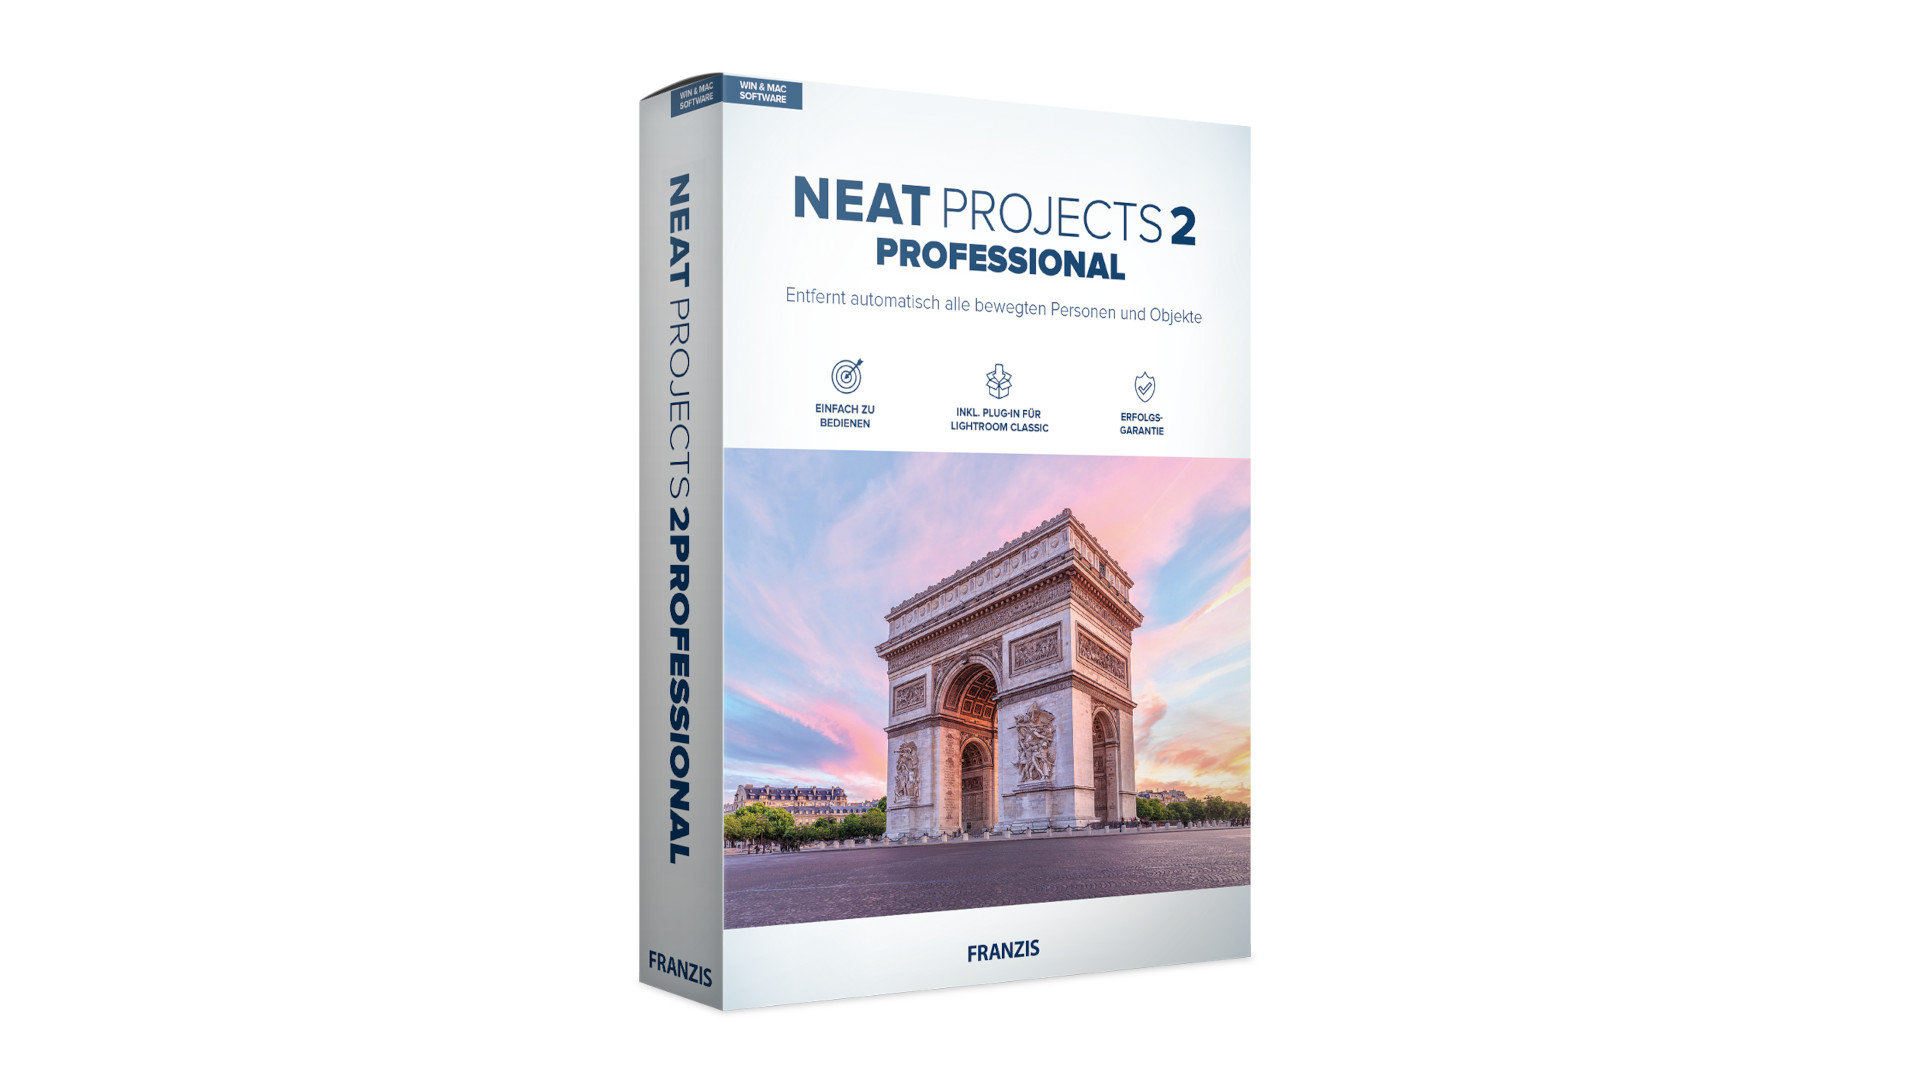 NEAT projects 2 Pro - Project Software Key (Lifetime / 1 PC), 33.89 usd